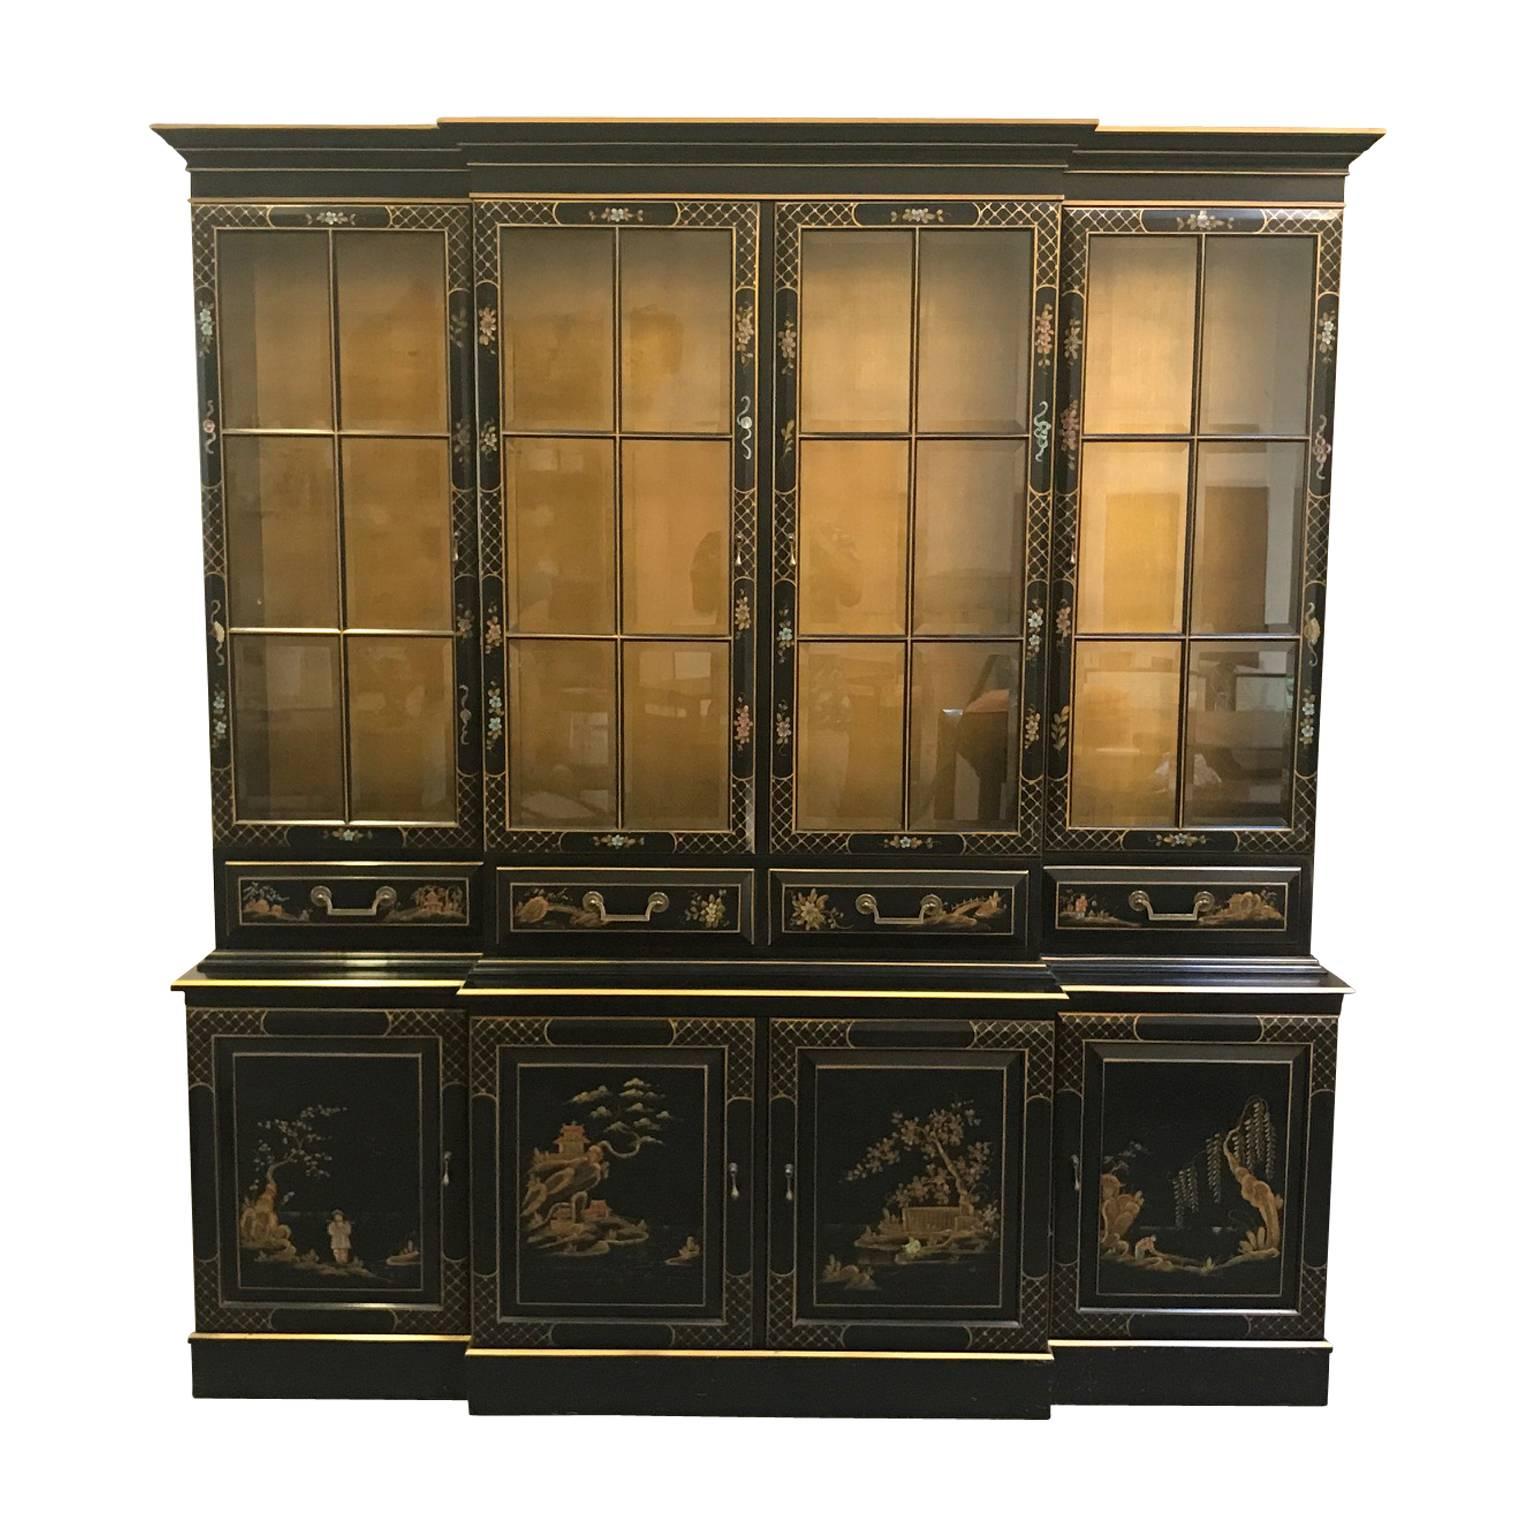 Gorgeous 20th century vintage China cabinet or buffet in the style of Karges with gold chinoiserie painted detailing. Fashioned with a breakfront secretary desk.